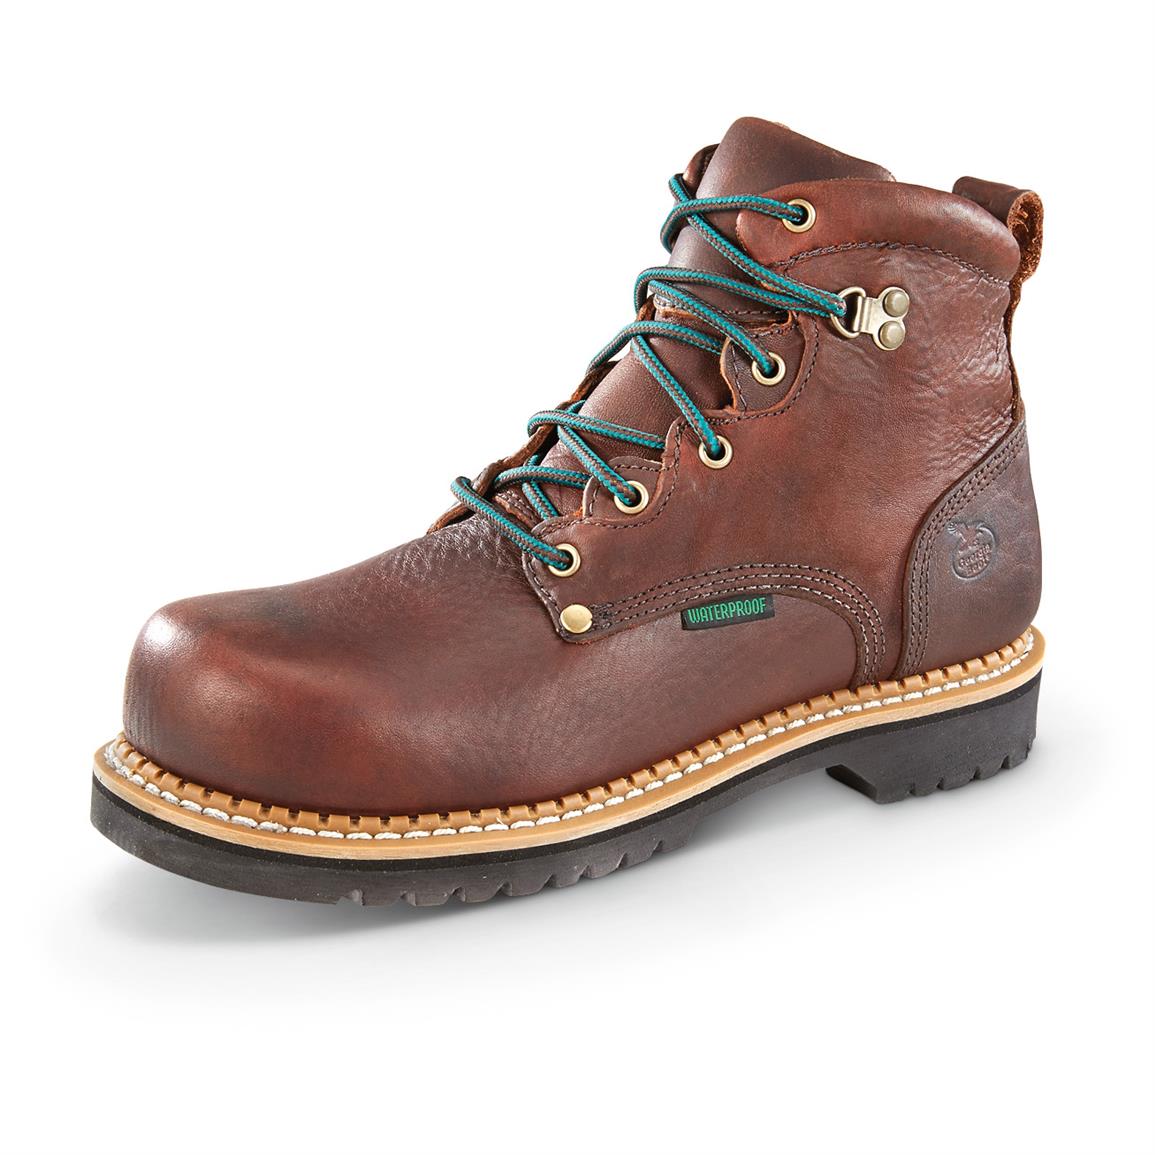 Georgia Boot Steel Toe Work Boots, Soggy Brown - 650650, Work Boots at ...